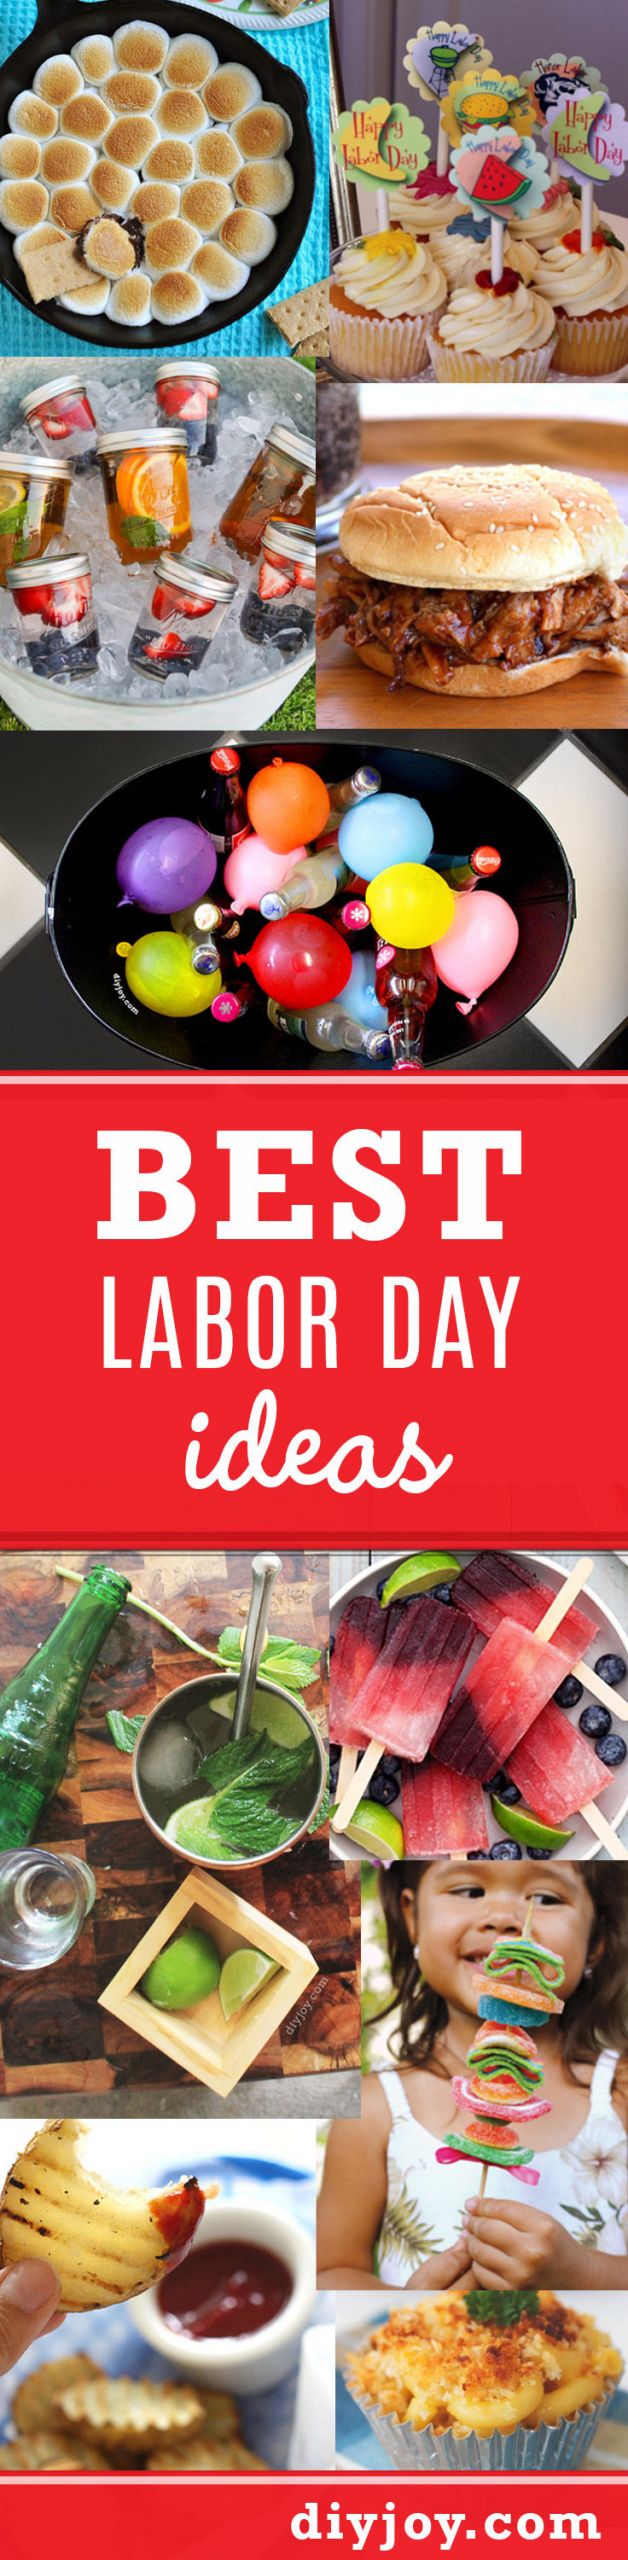 Labor Day Ideas For Celebration
 Quick & Easy DIY Ideas to Make Your Labor Day Celebration